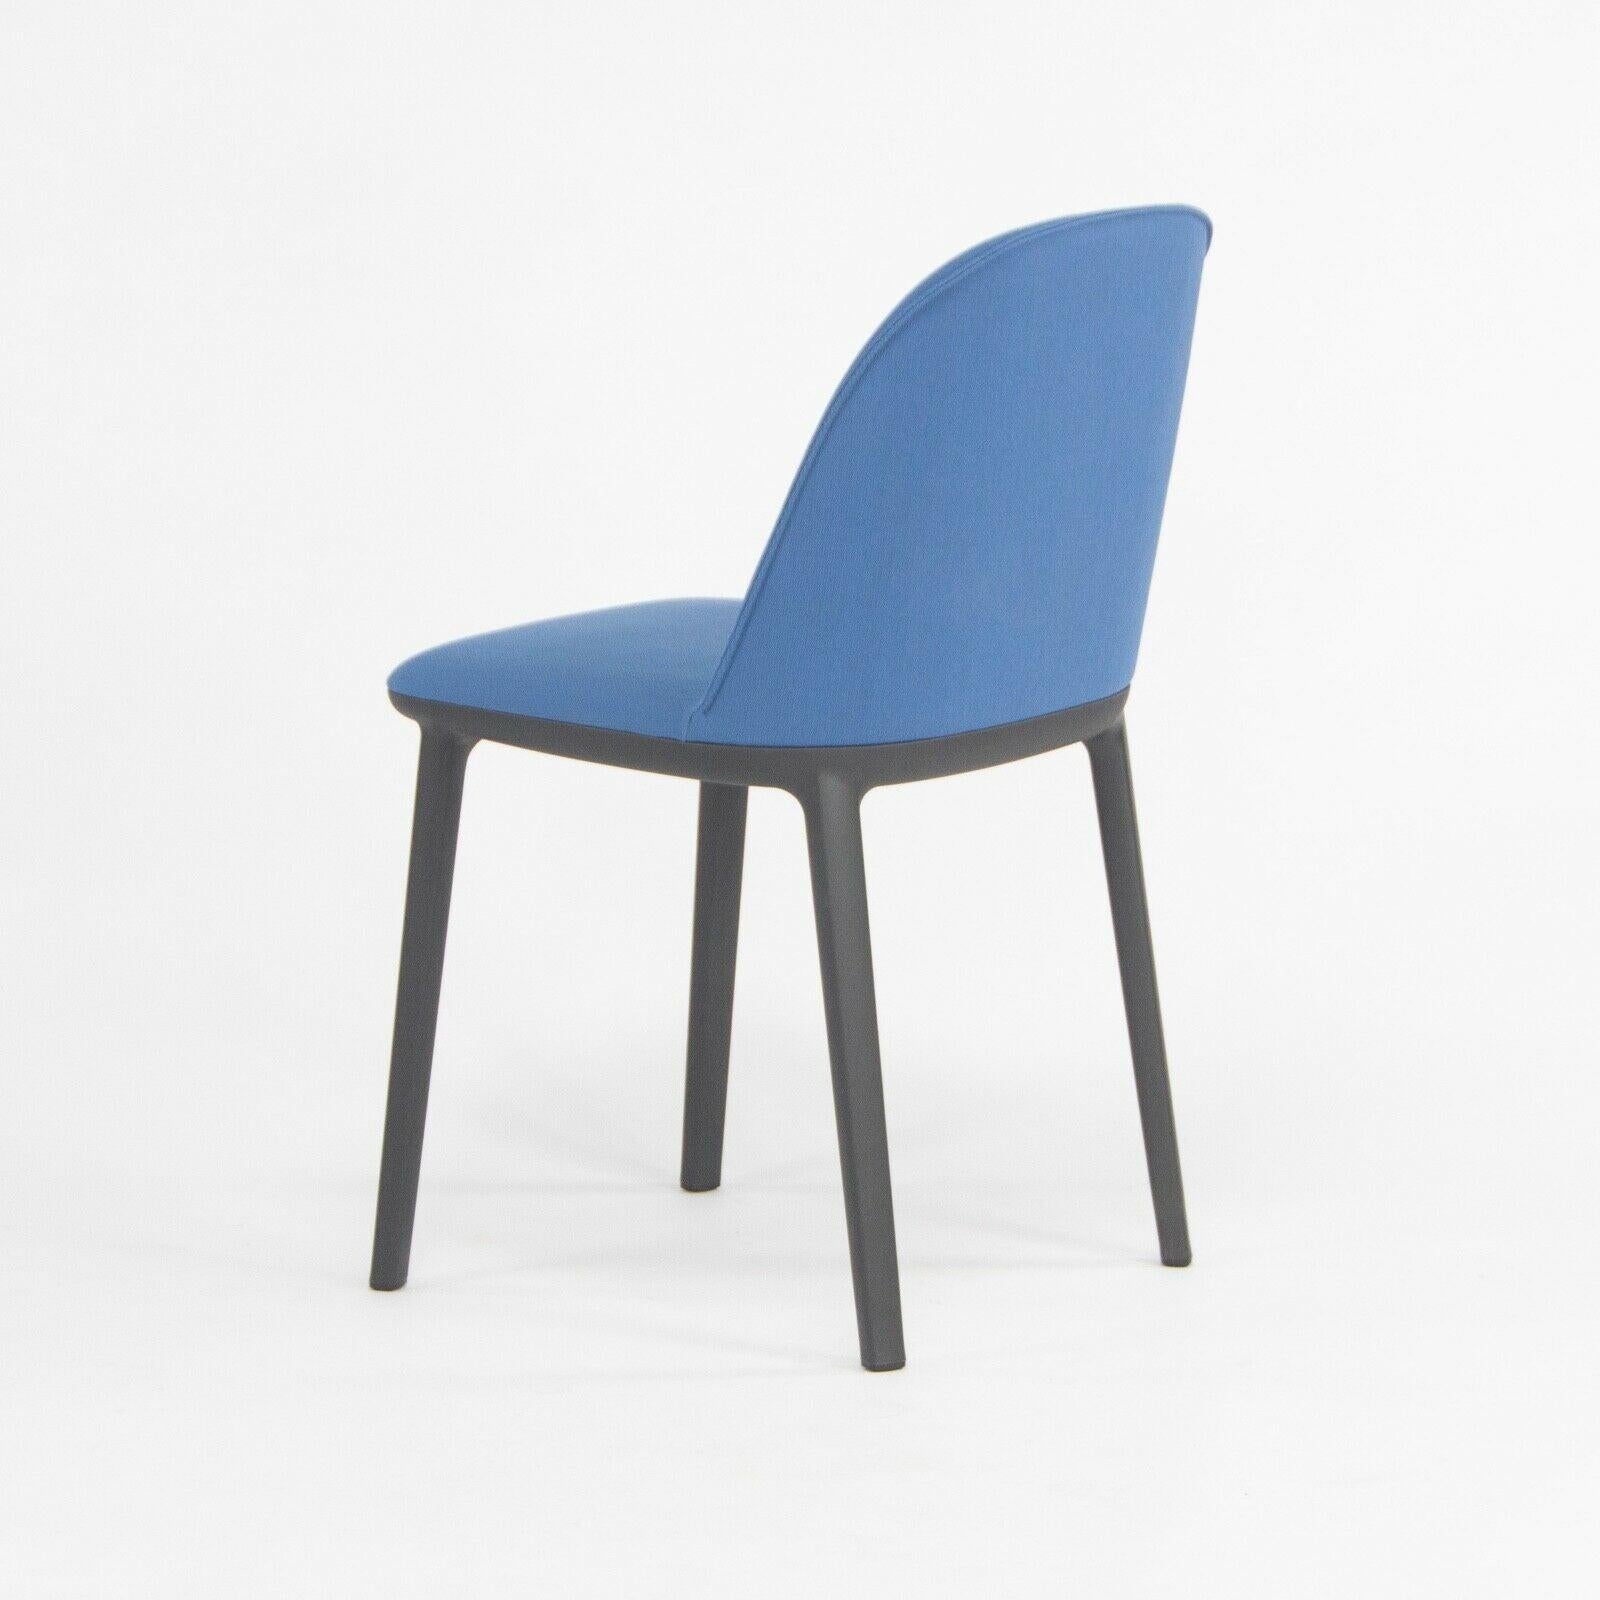 2019 Vitra Softshell Side Chair w/ Light Blue Fabric by Ronan & Erwan Bouroullec In Good Condition For Sale In Philadelphia, PA